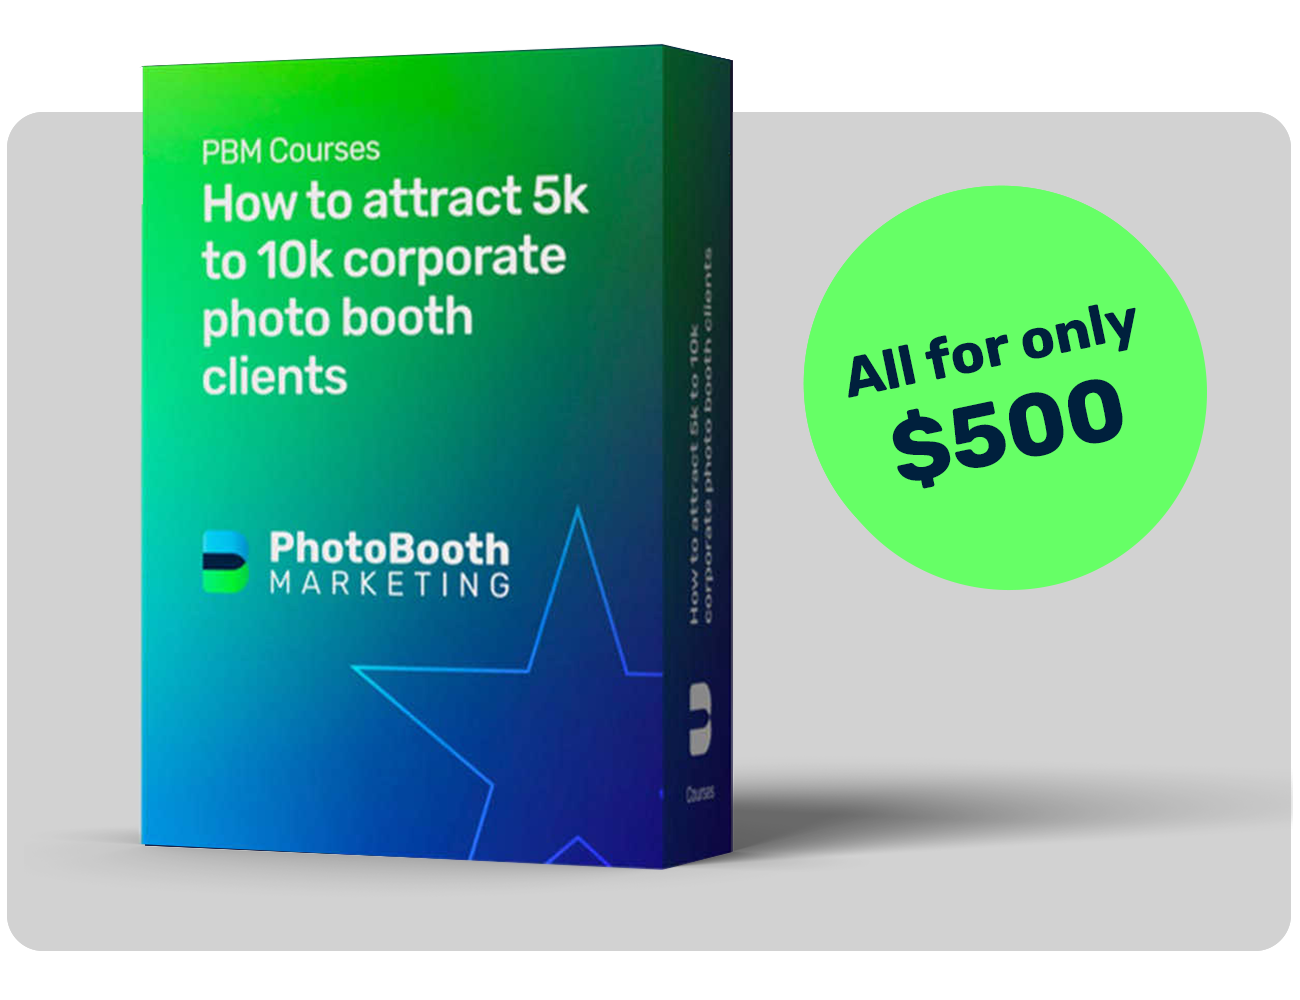 How to attract 5k to 10k corporate photo booth clients